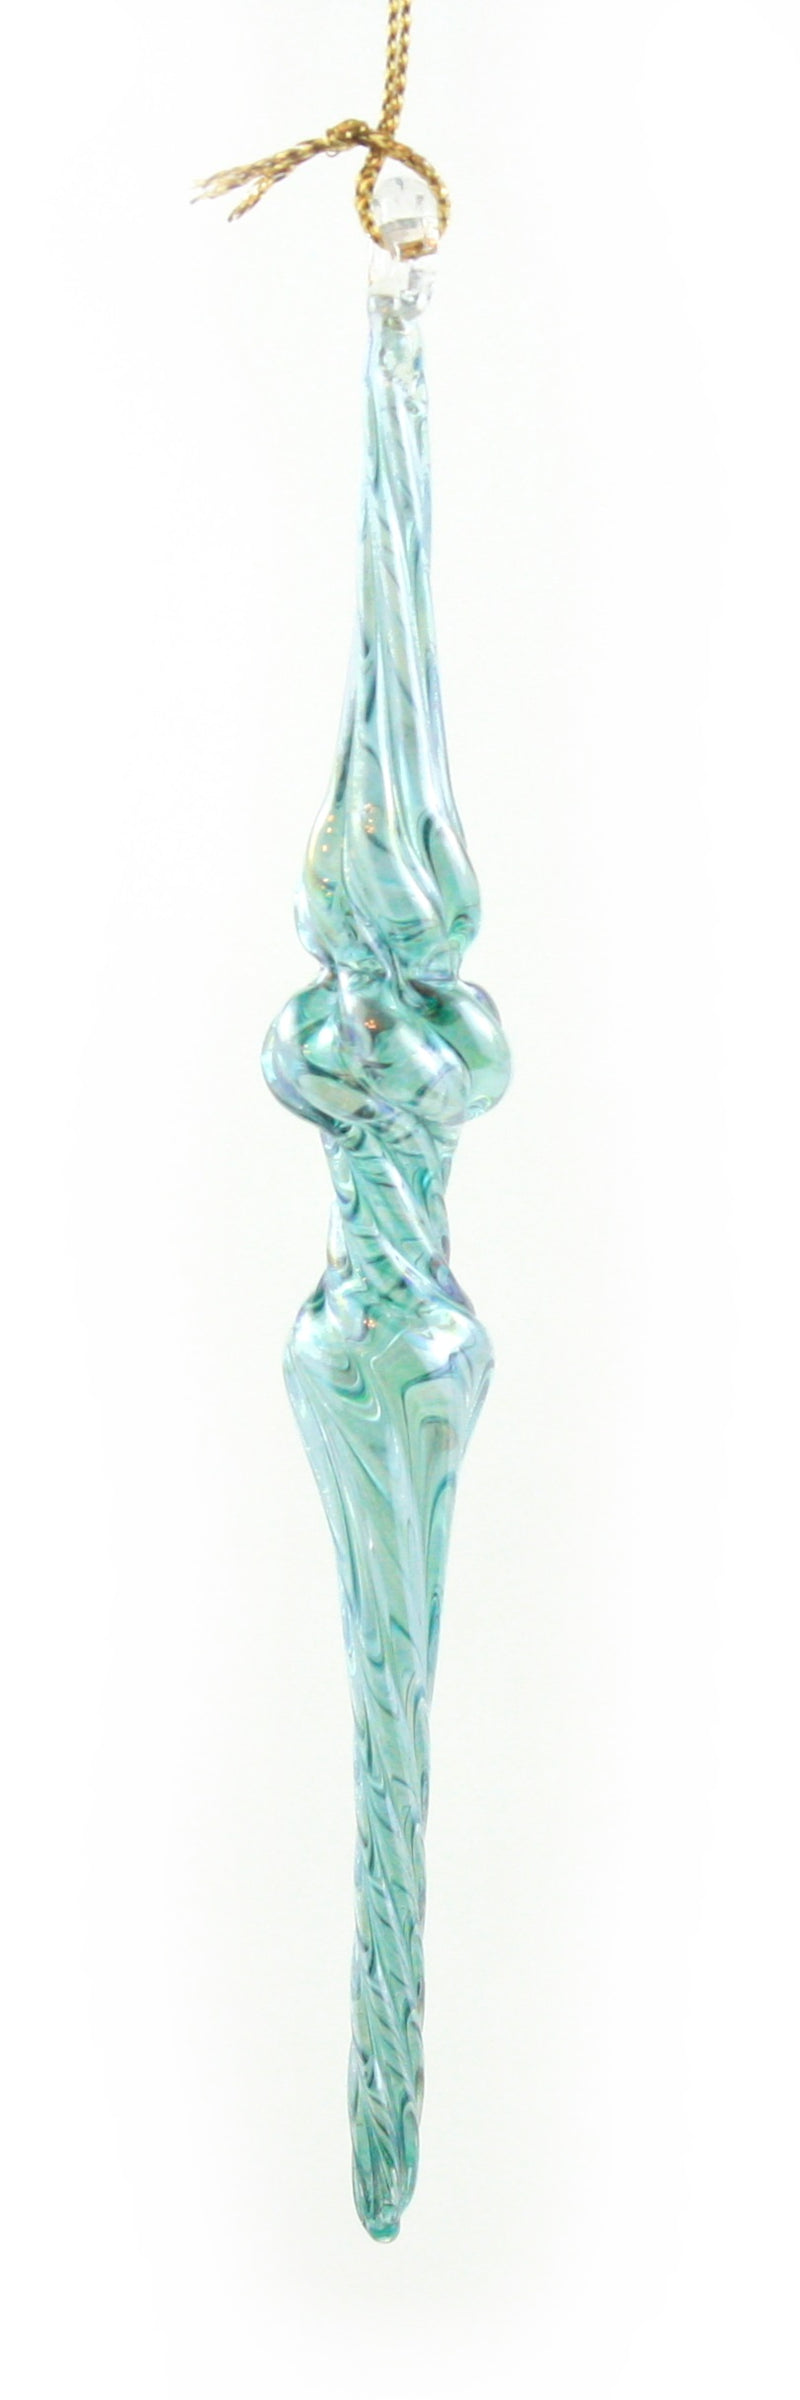 Outer Swirl Icicle Glass Ornaments - Green - Double Torus